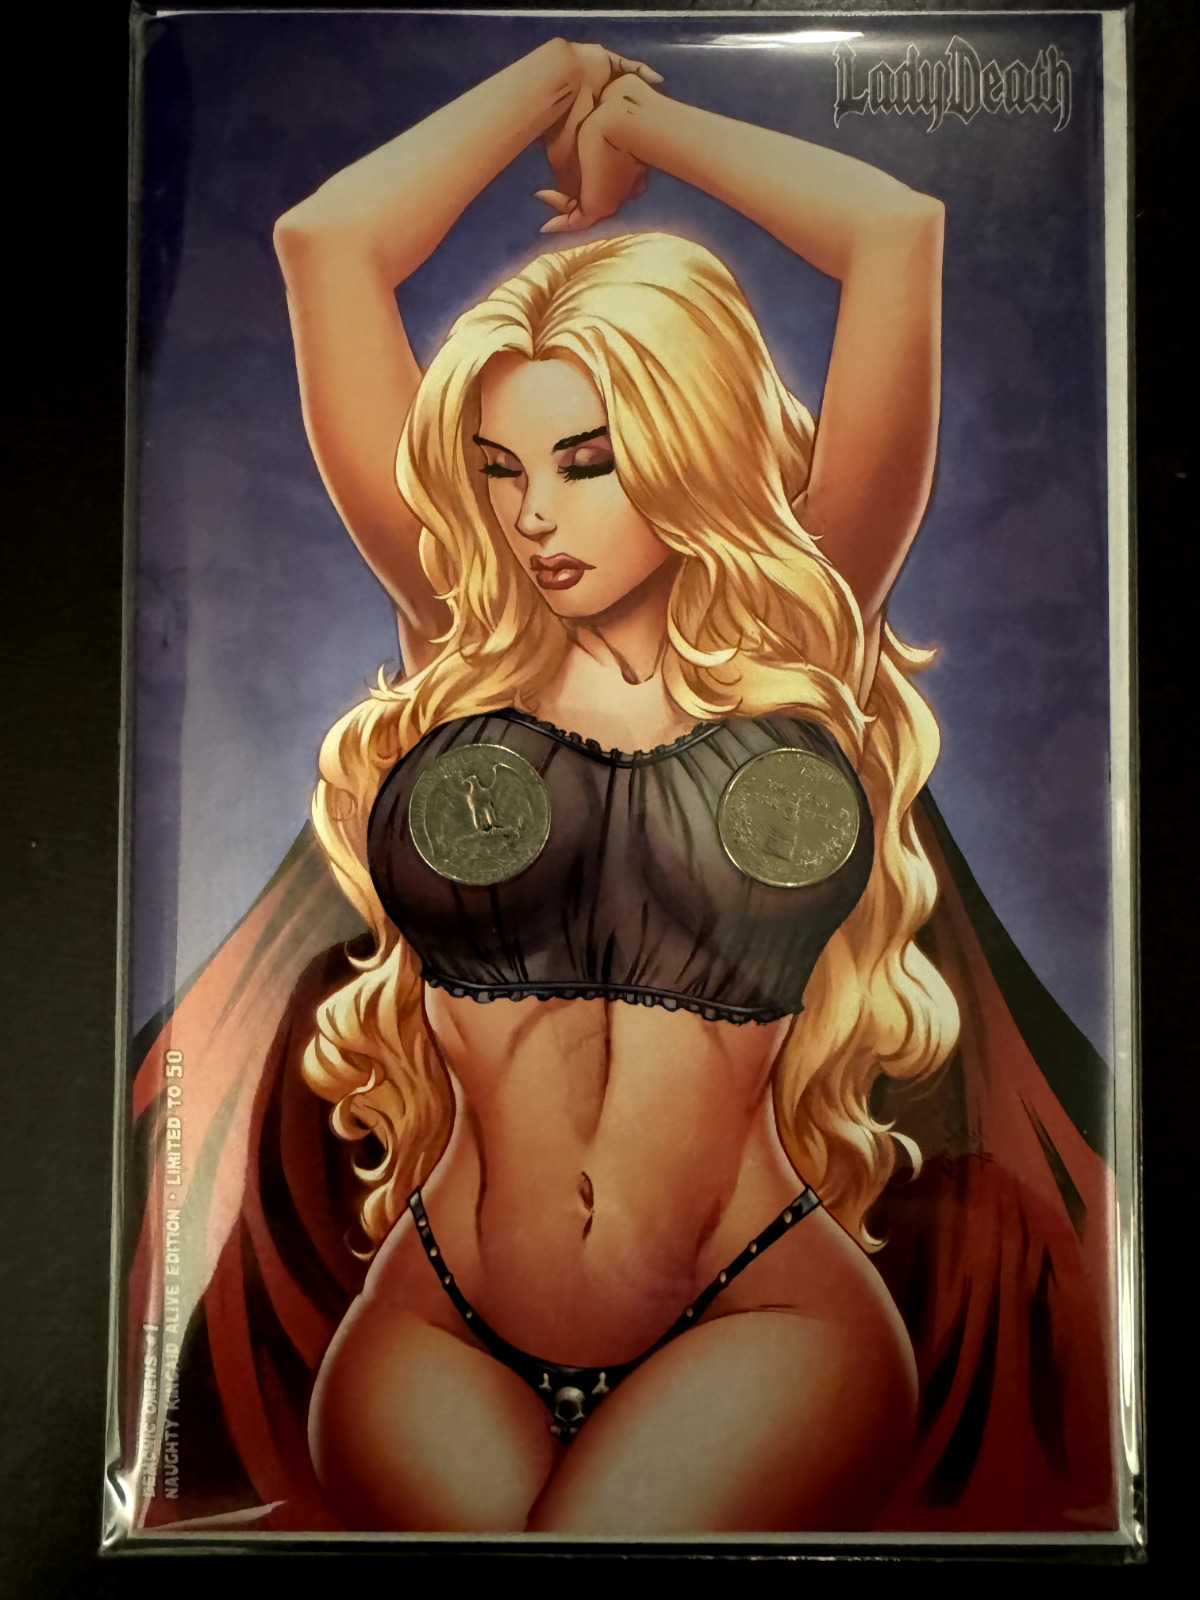 Lady Death Demonic Omens #1 Naughty Alive Edition Black Envelope Limited to 50